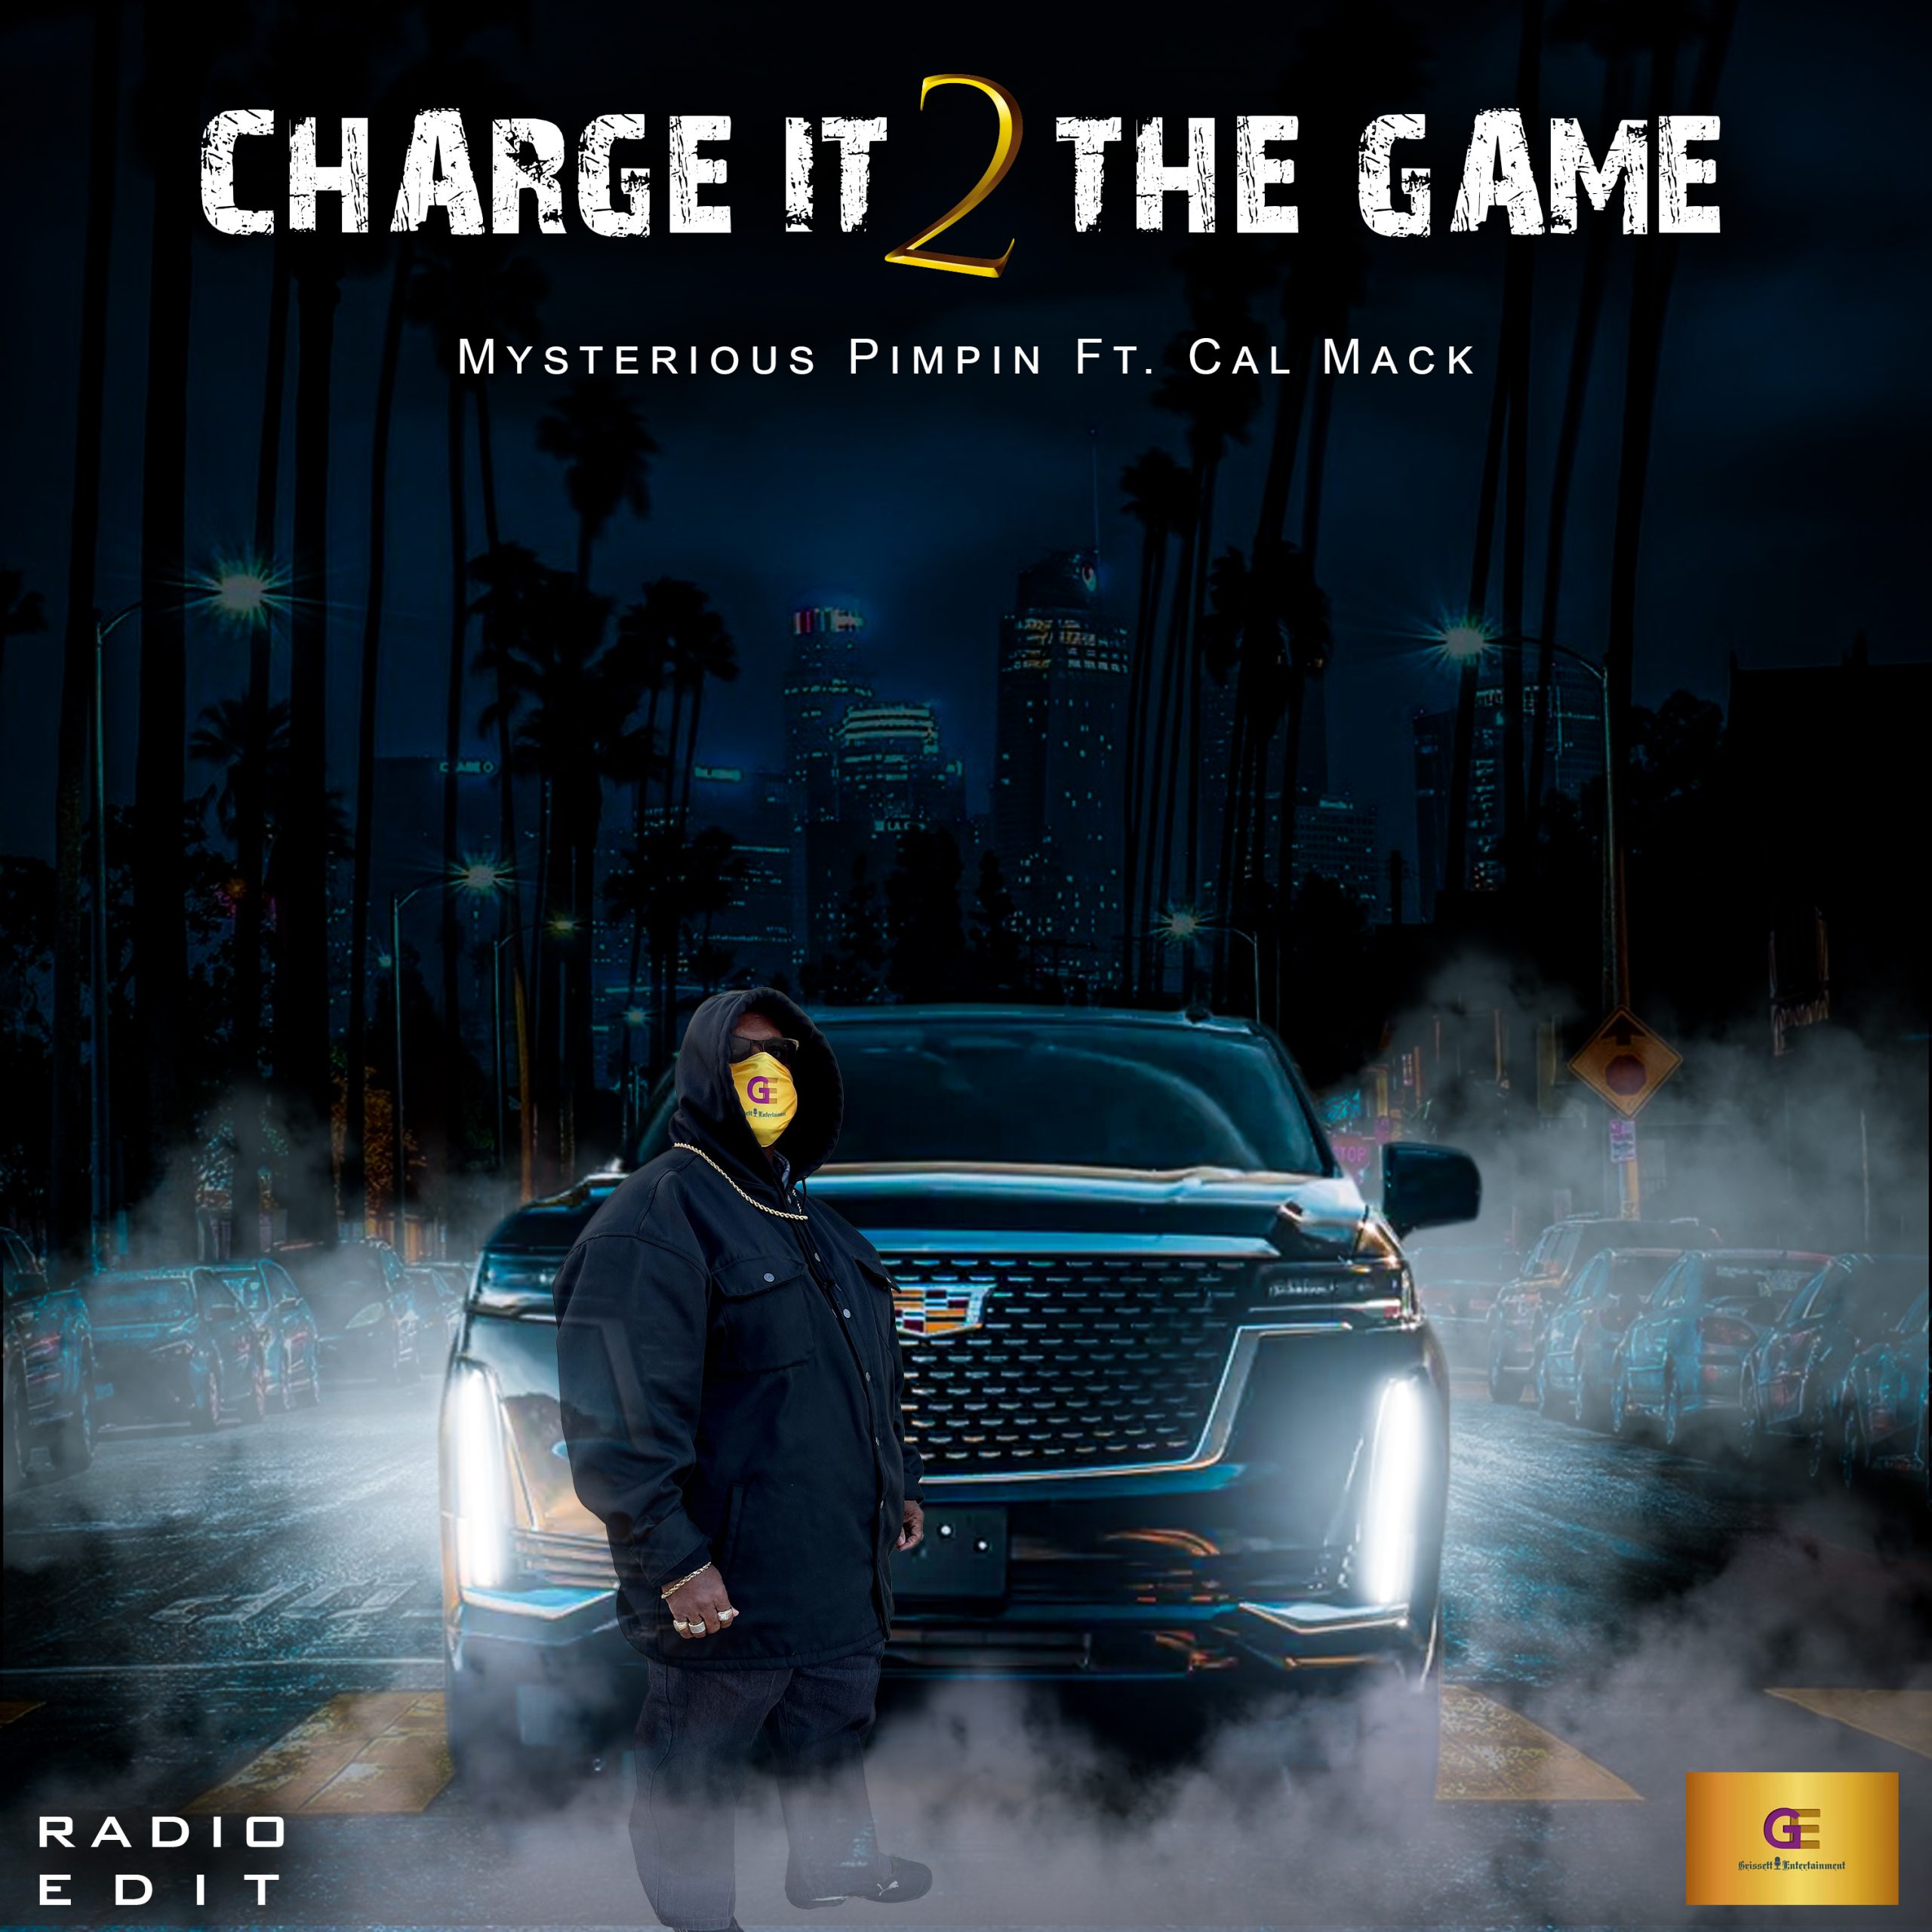 Elevating Hip Hop to New Heights: ‘Mysterious Pimpin Ft Cal Mack’ drop hot new banger ‘Charge It 2 The Game’ on the London Digital playlist now.